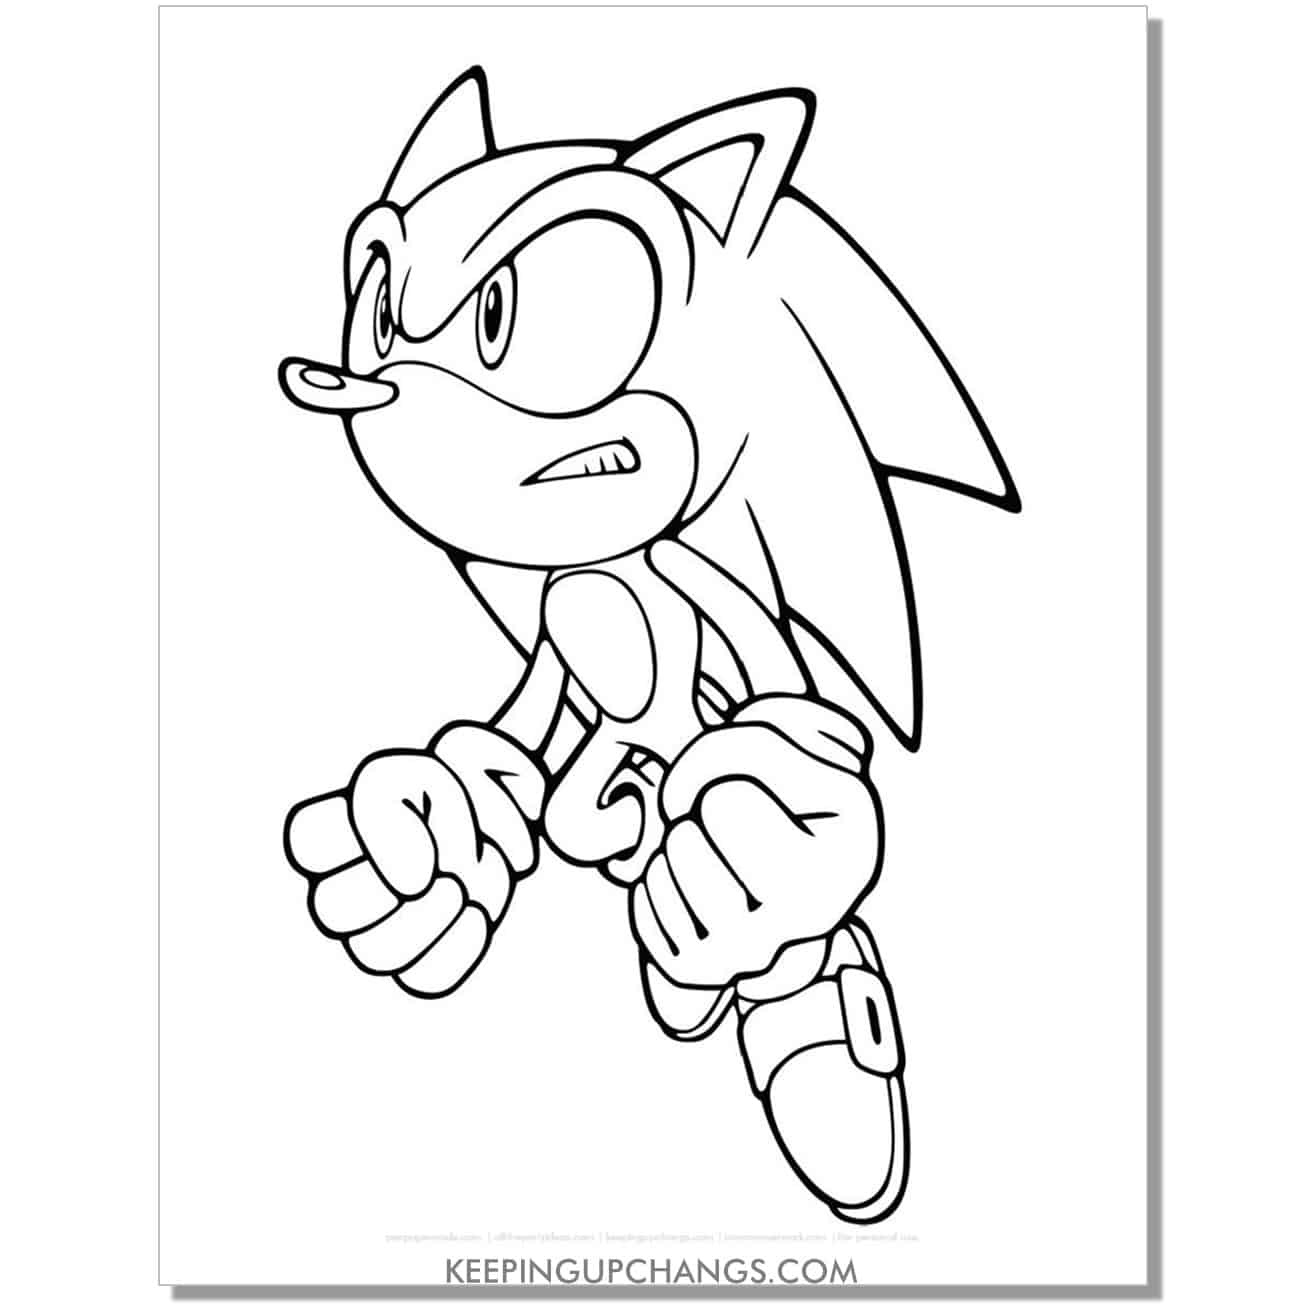 sonic looking up at sky and hands in fists coloring page.